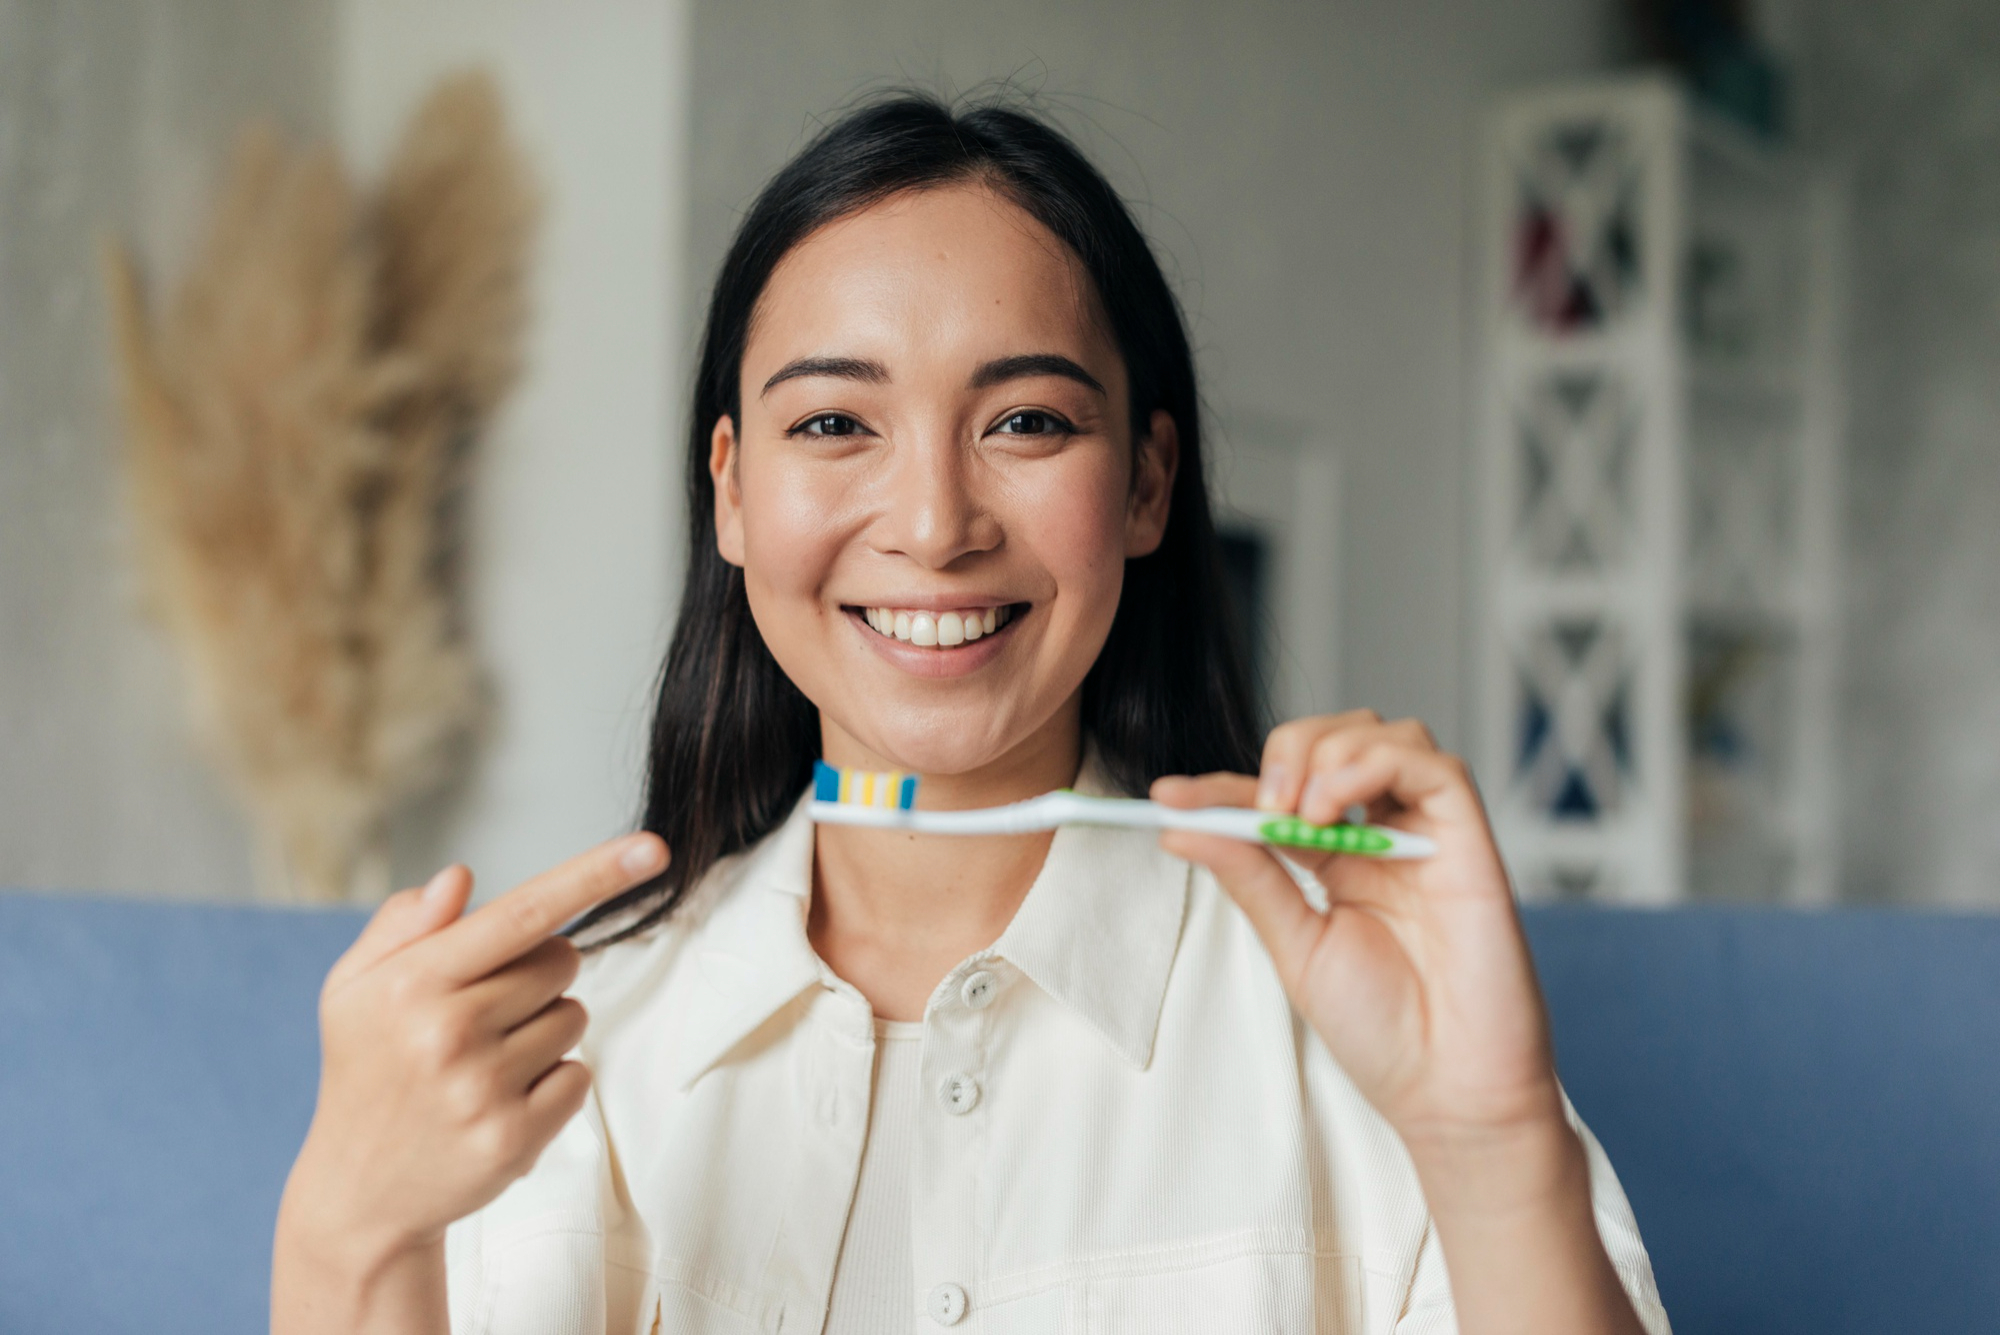 6 Reasons to Switch to Enzyme Toothpaste for Healthier Teeth and Gums